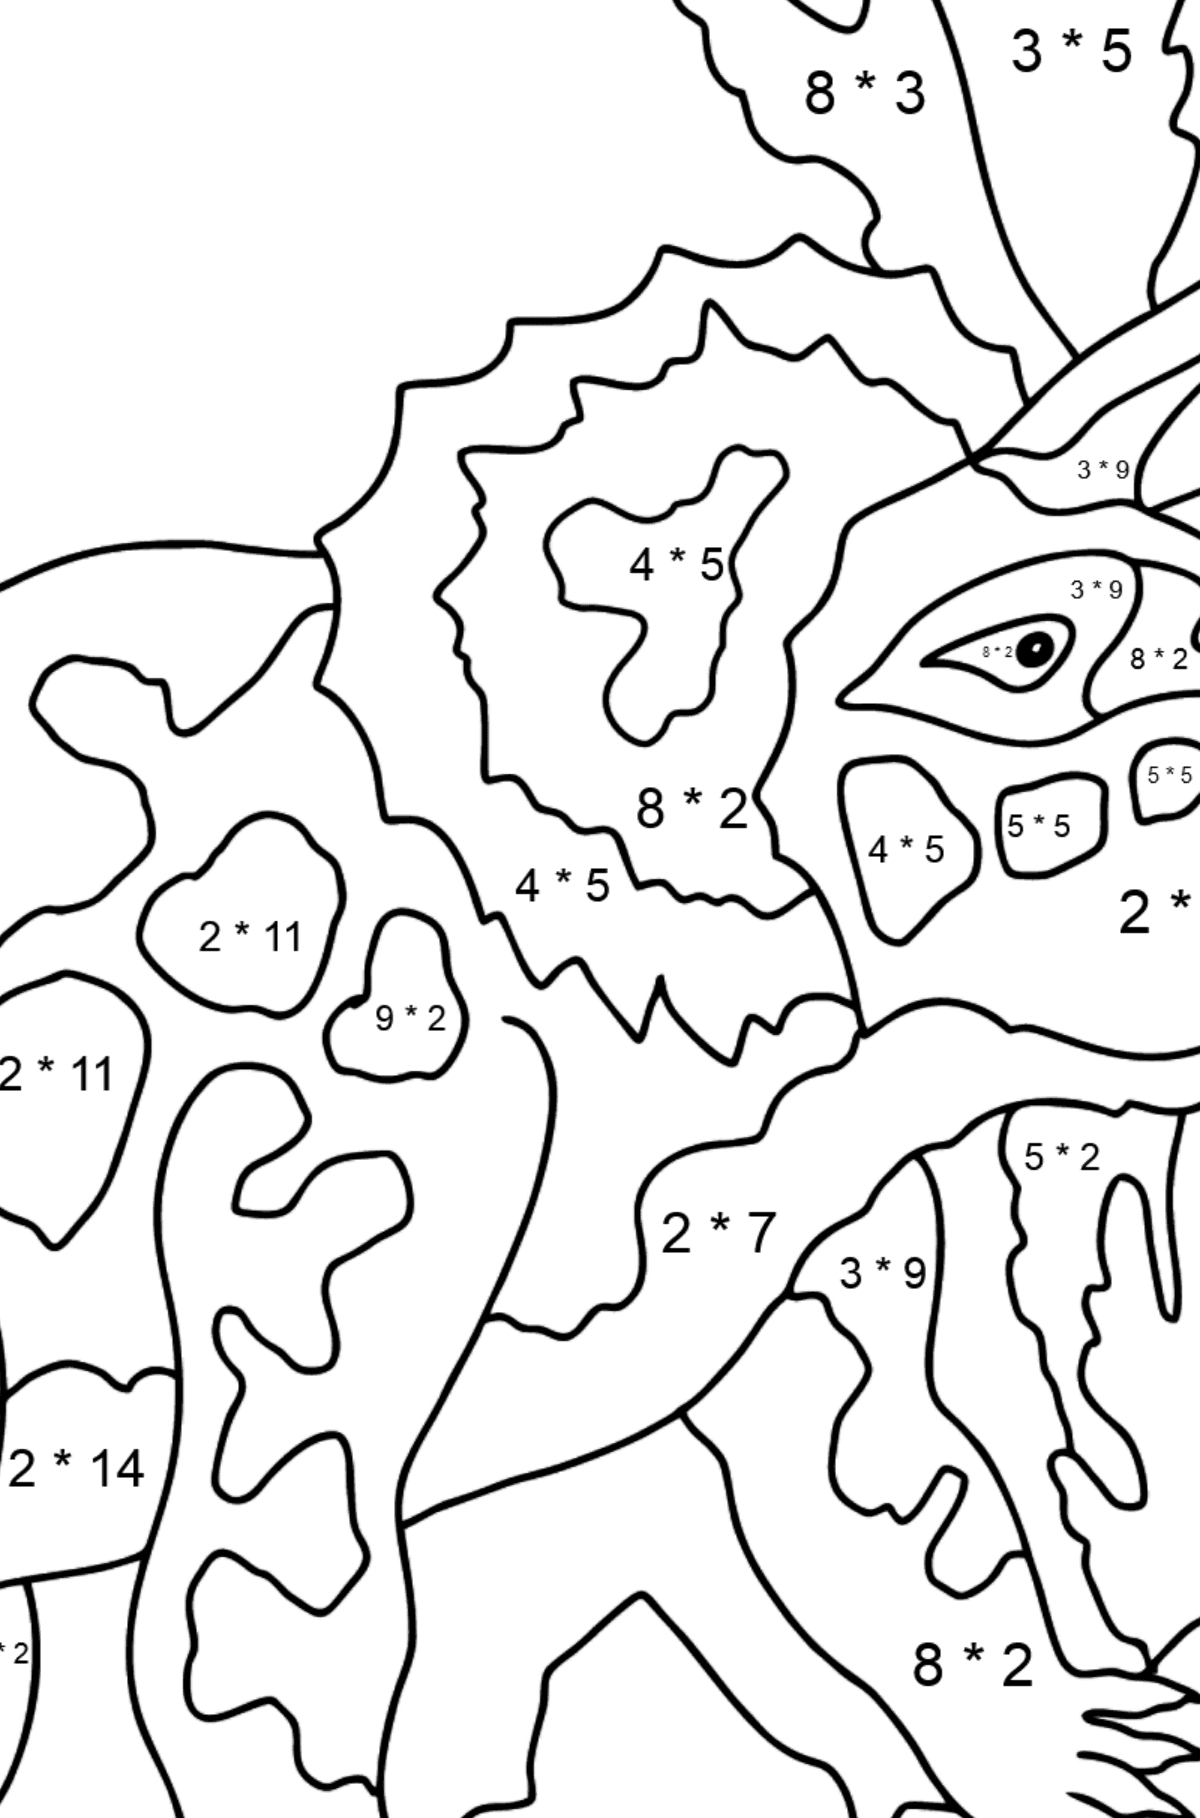 Coloring Page - Triceratops - A Grass-Eating Dinosaur - Math Coloring - Multiplication for Kids